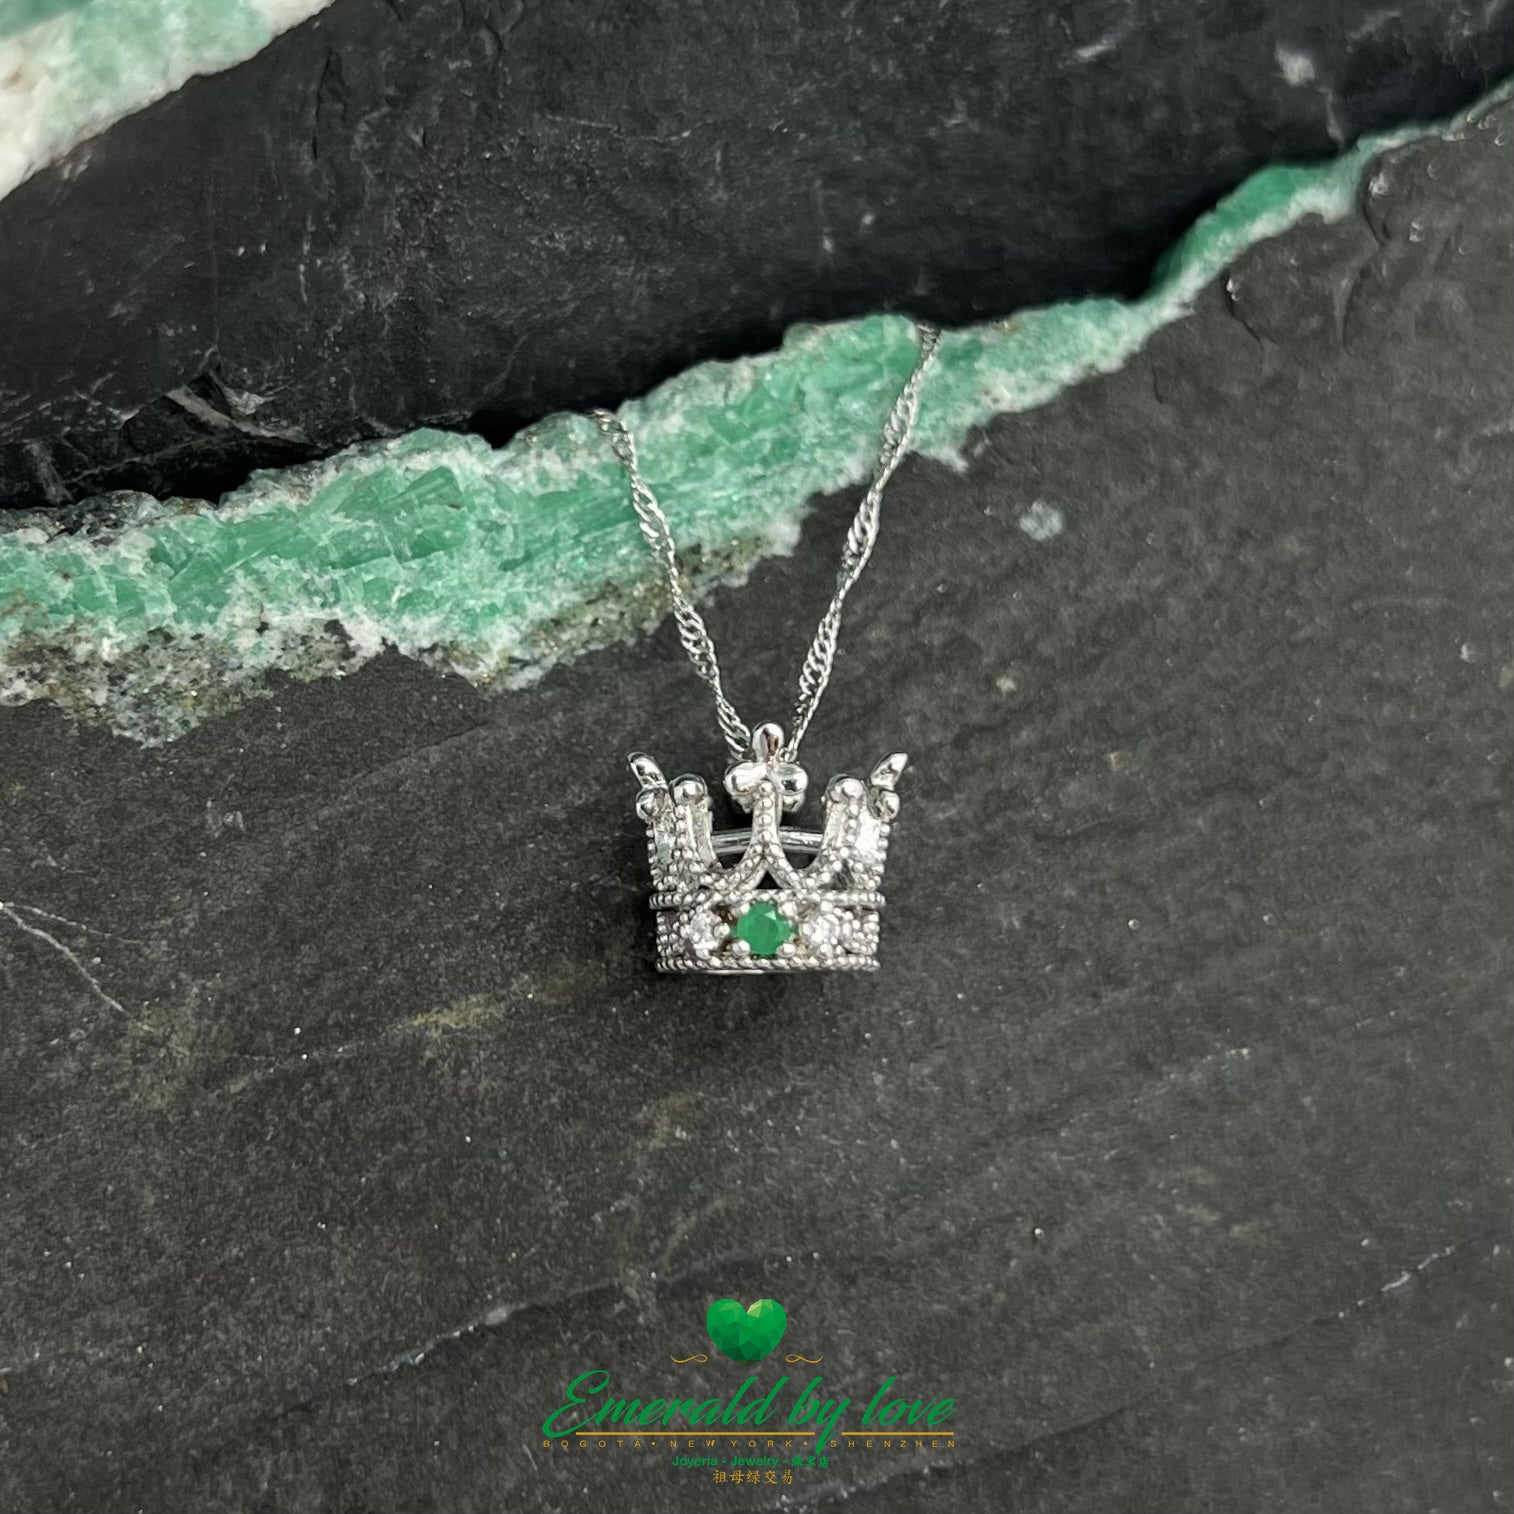 Silver Crown Relief Pendant with Small Round Emerald Center